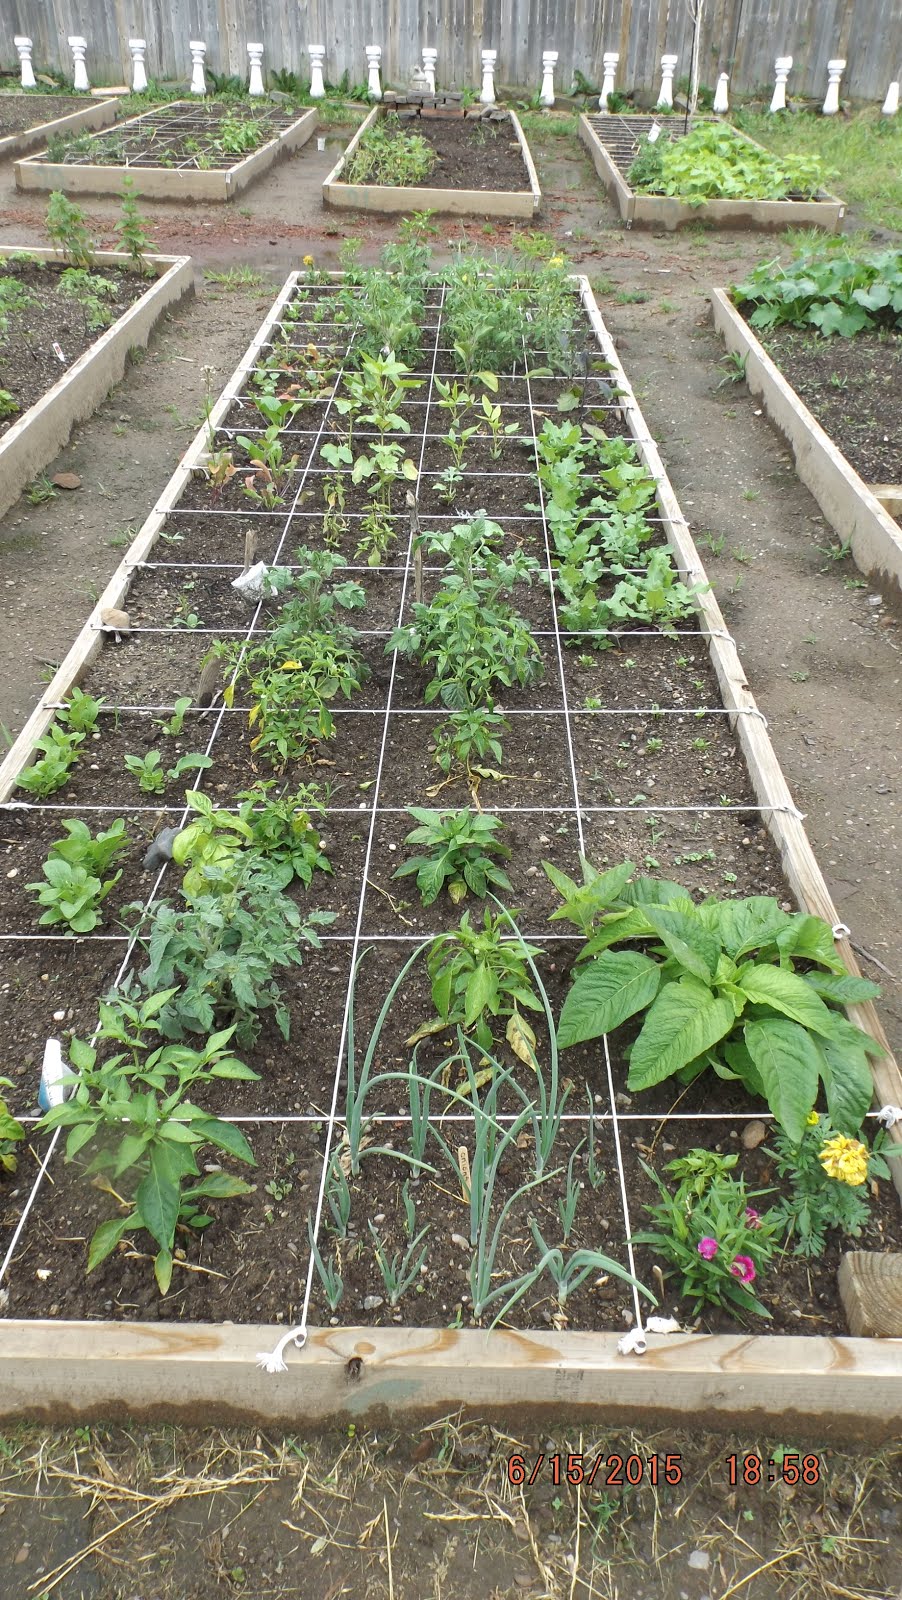 Transformed into Raised Beds